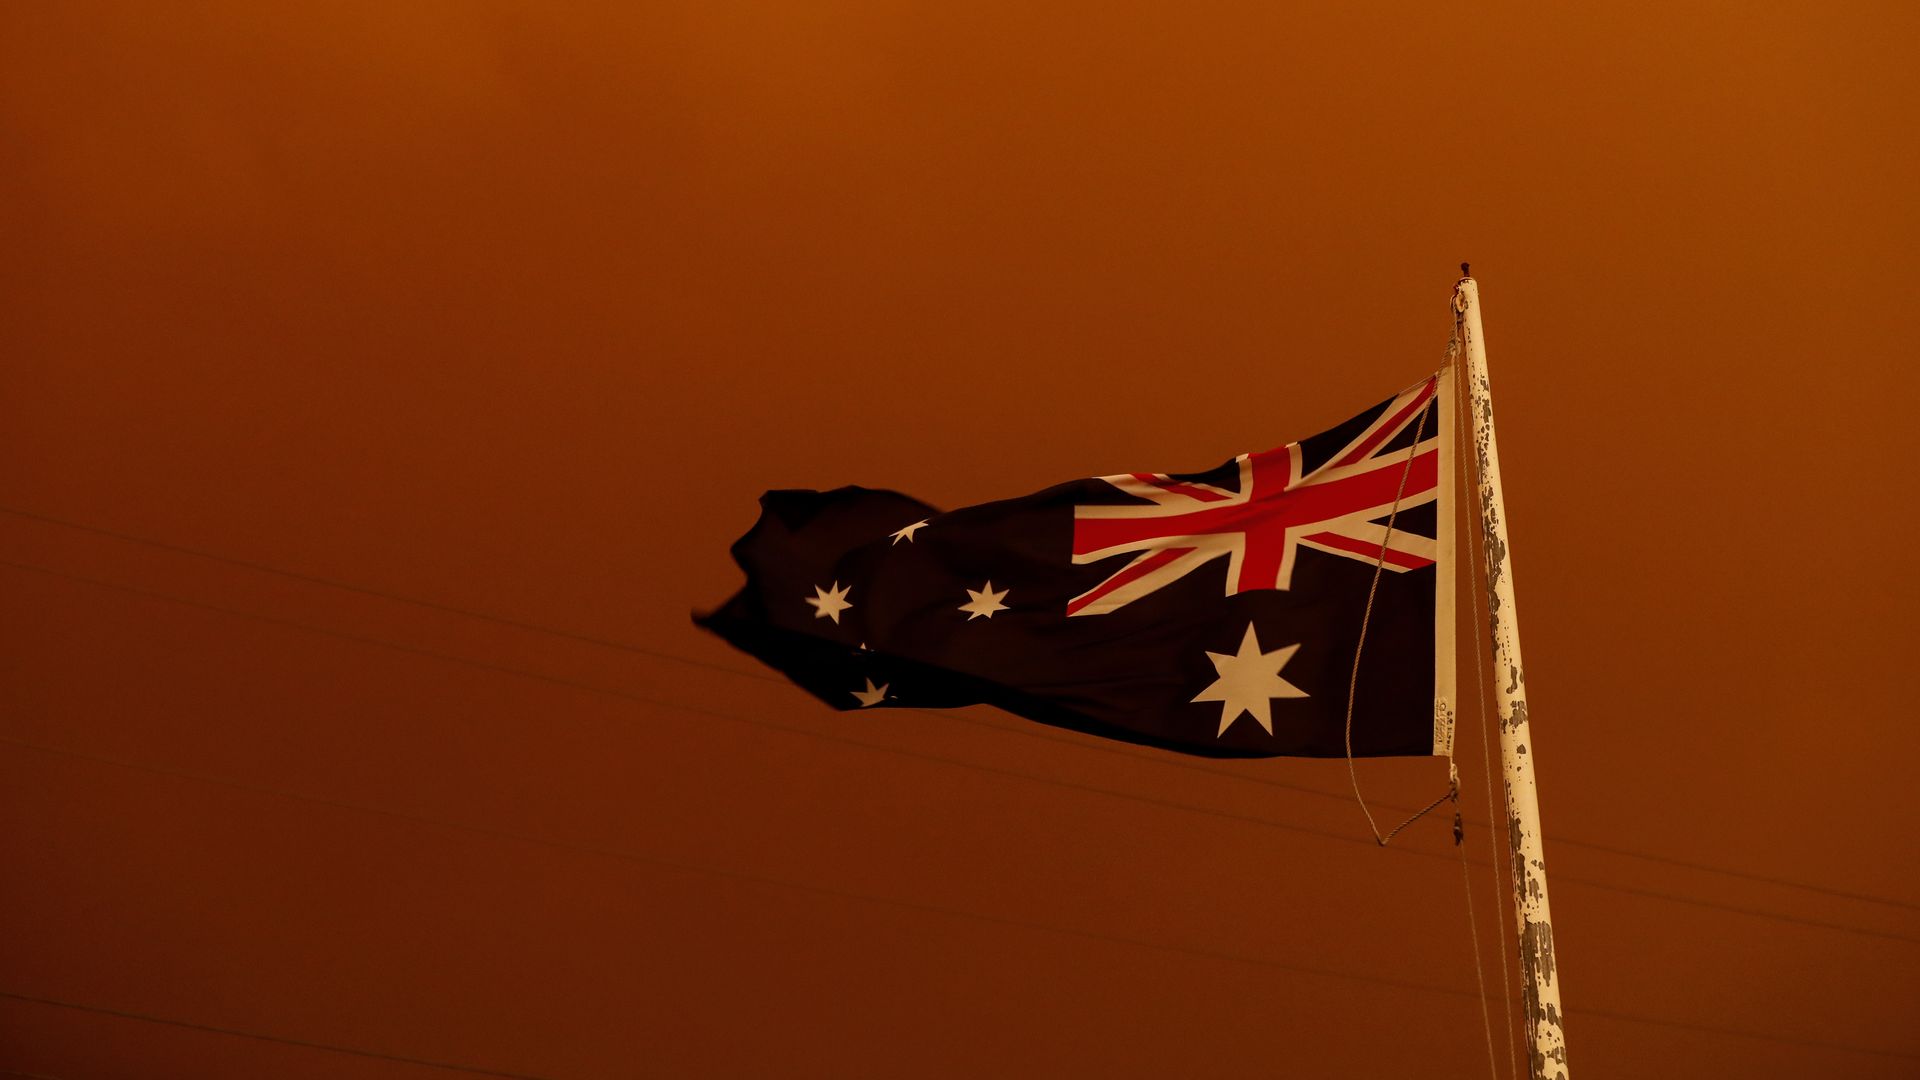 In this image, the Australian flag is seen behind a red sky.